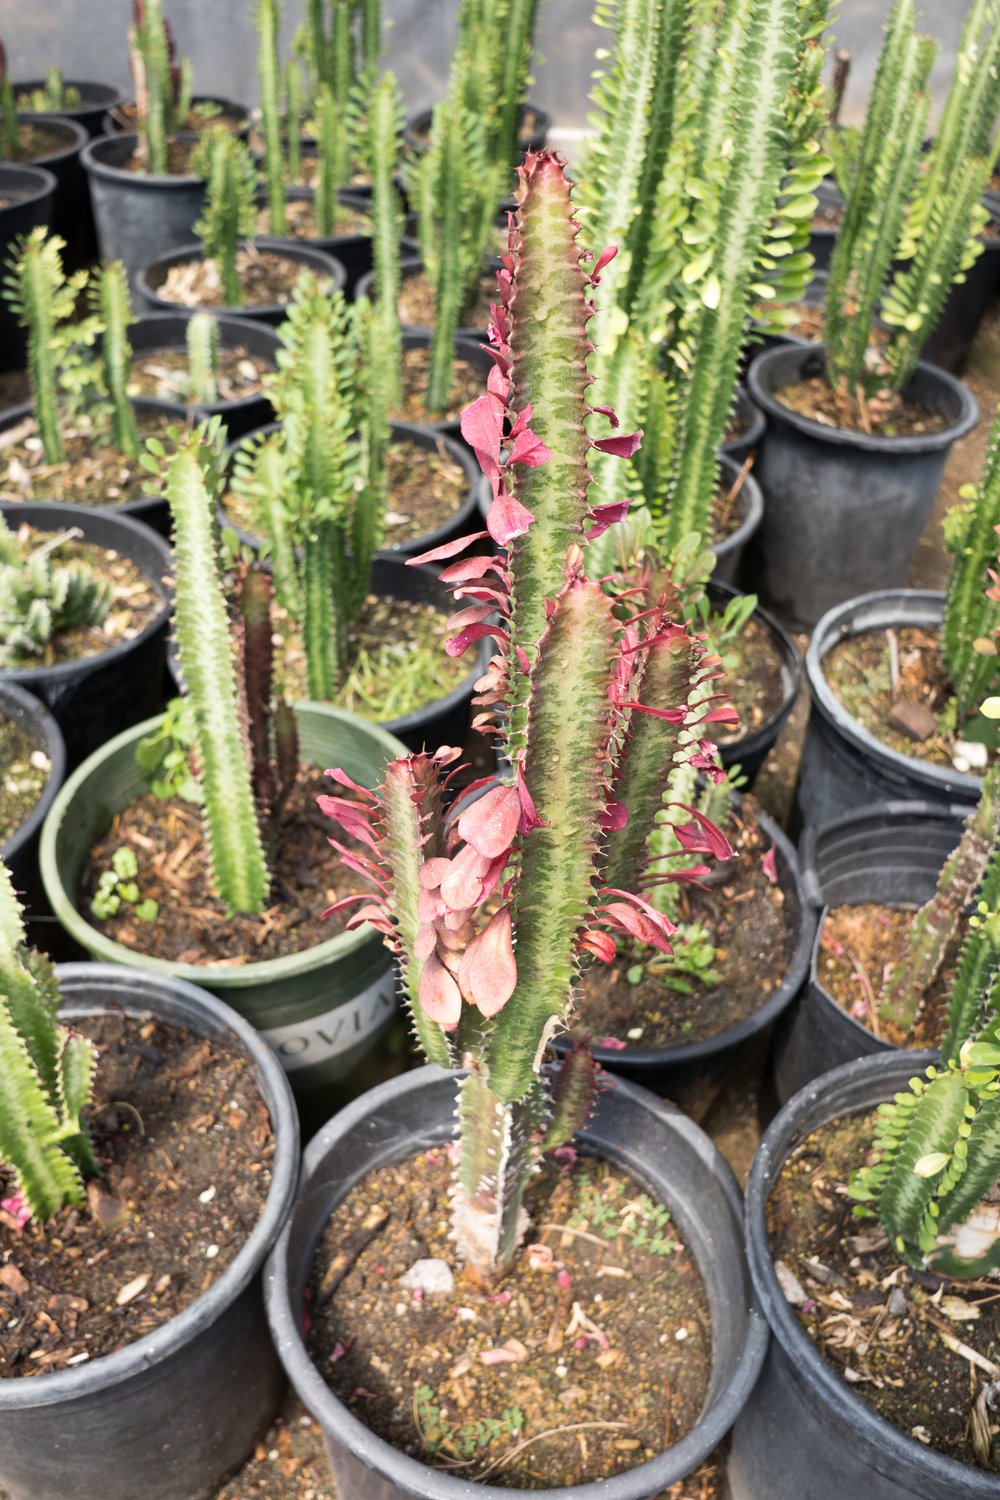 All plants for sale. Specializing in desert and drought-resistant plants. —  GDNC Nursery